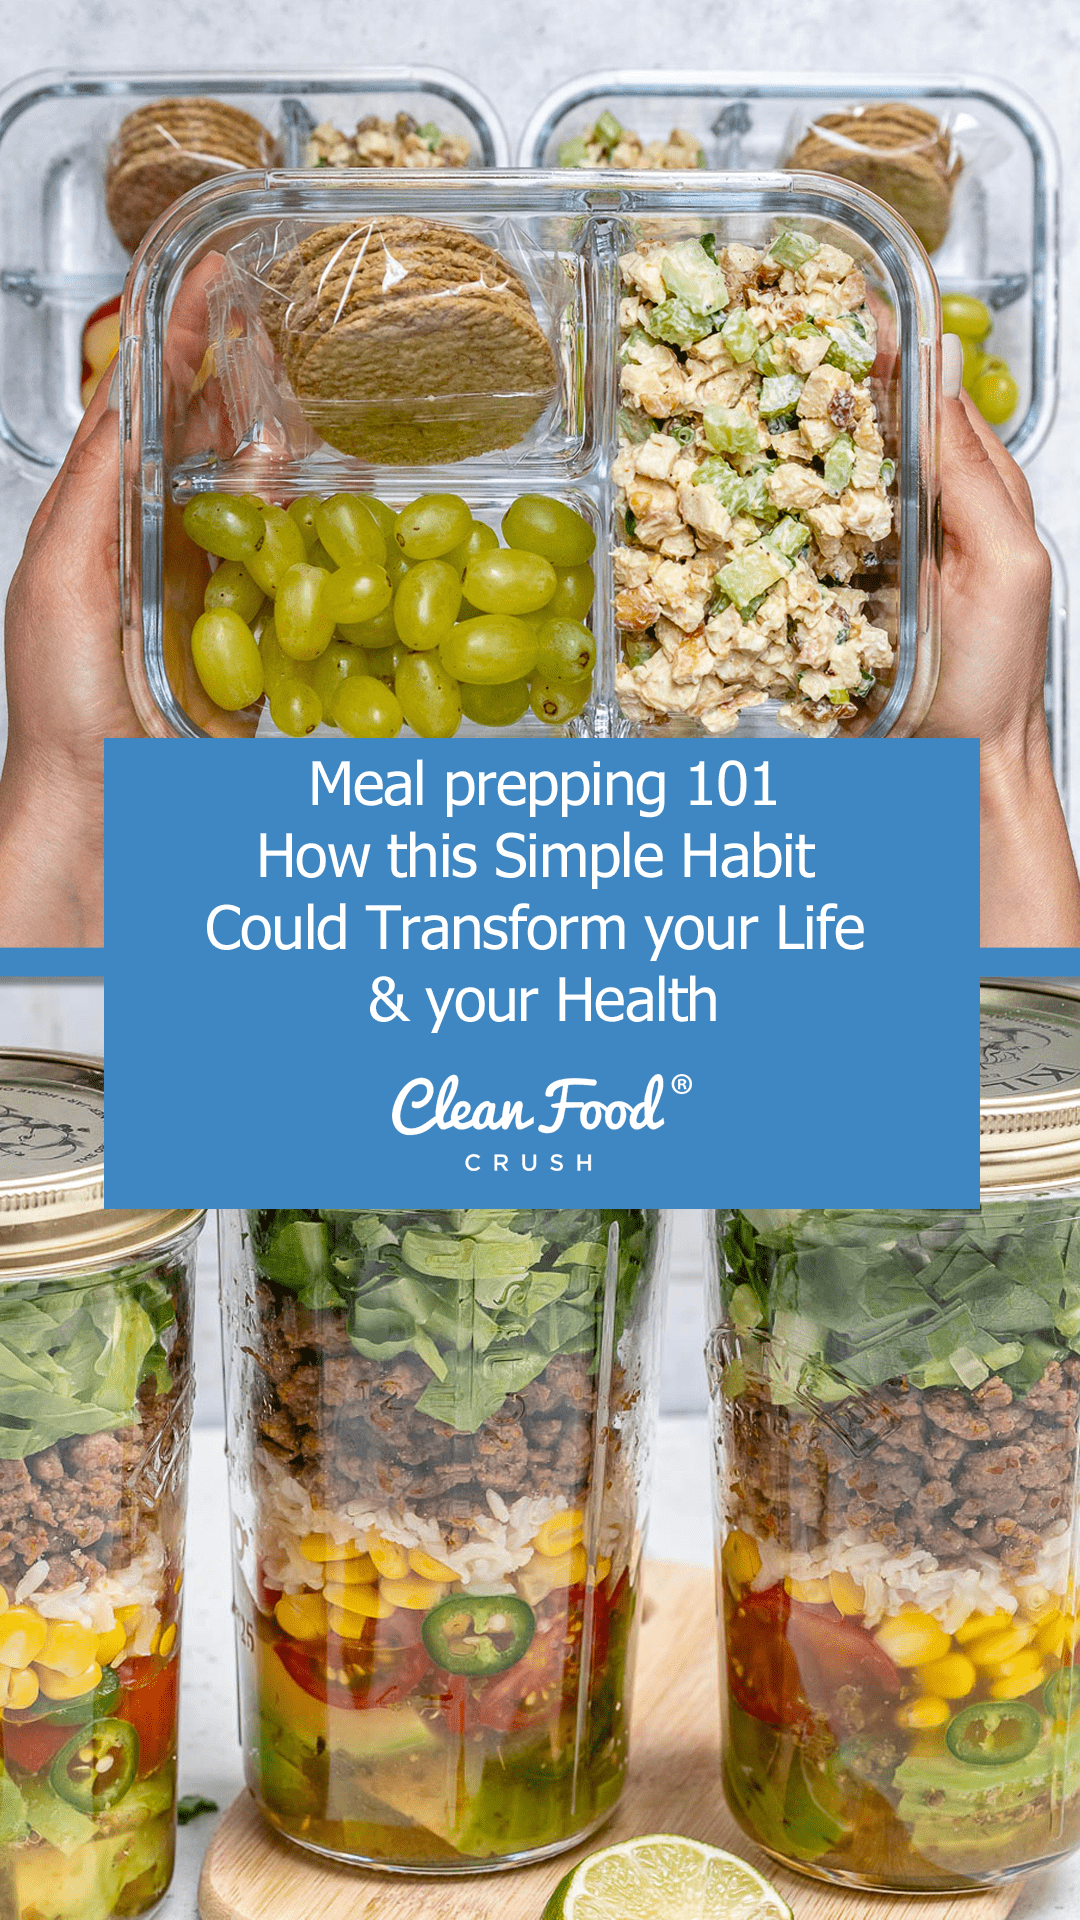 Good for you & the planet: An intro to meal prepping with reusable